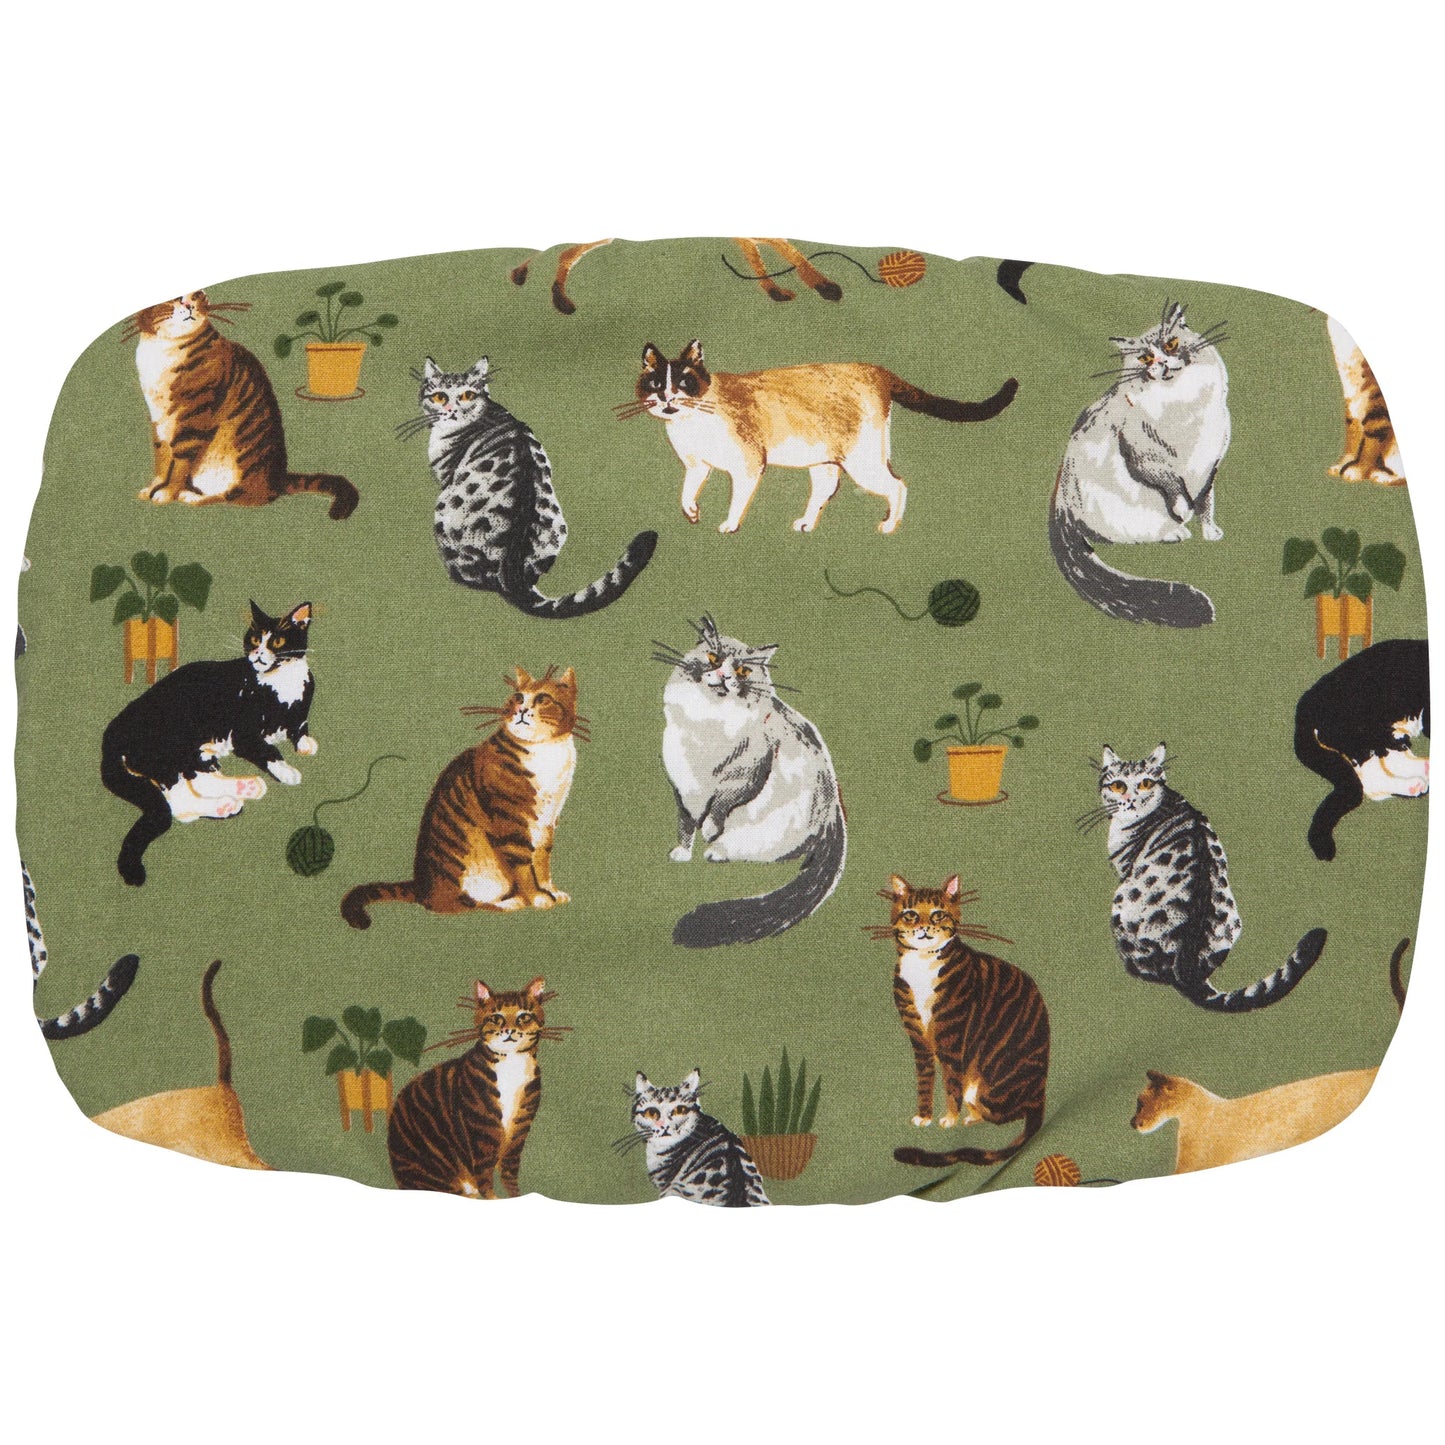 Cat Collective Baking Dish Cover